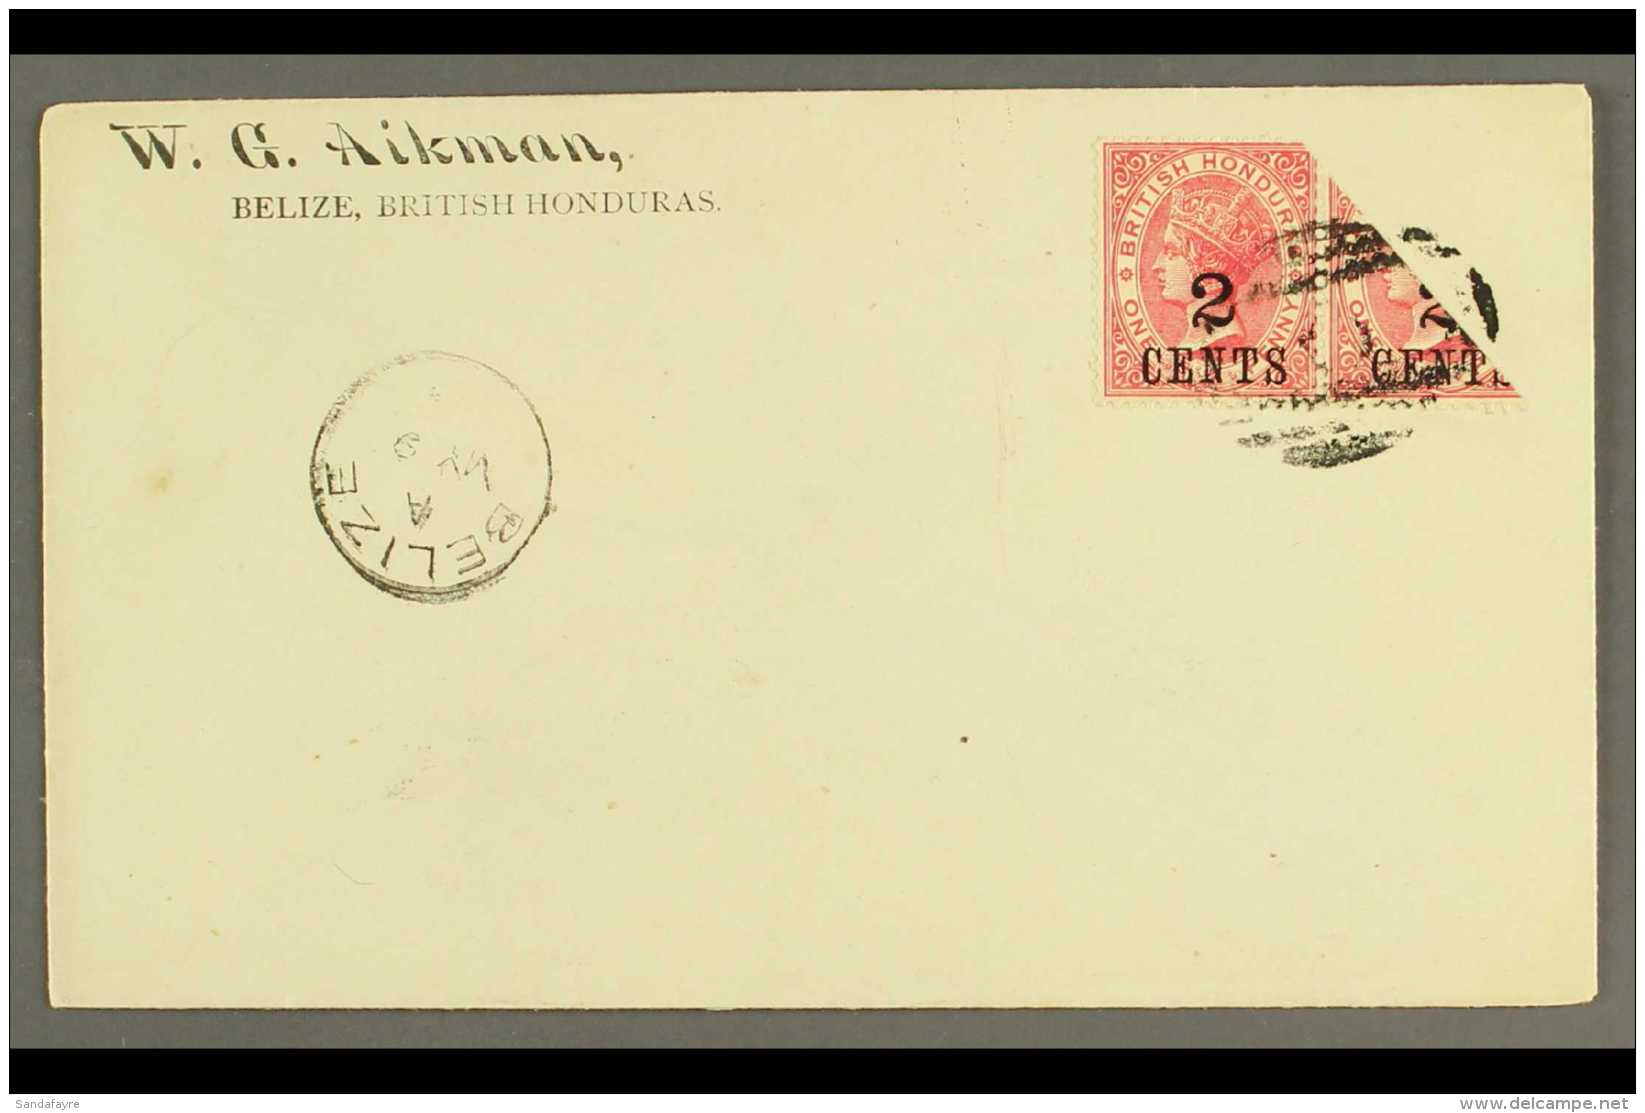 1888 2c On 1d Carmine In Pair With Bisected Stamp (1d), Tied On Untravelled Cover By Barred AO6 Barred Cancel With... - Brits-Honduras (...-1970)